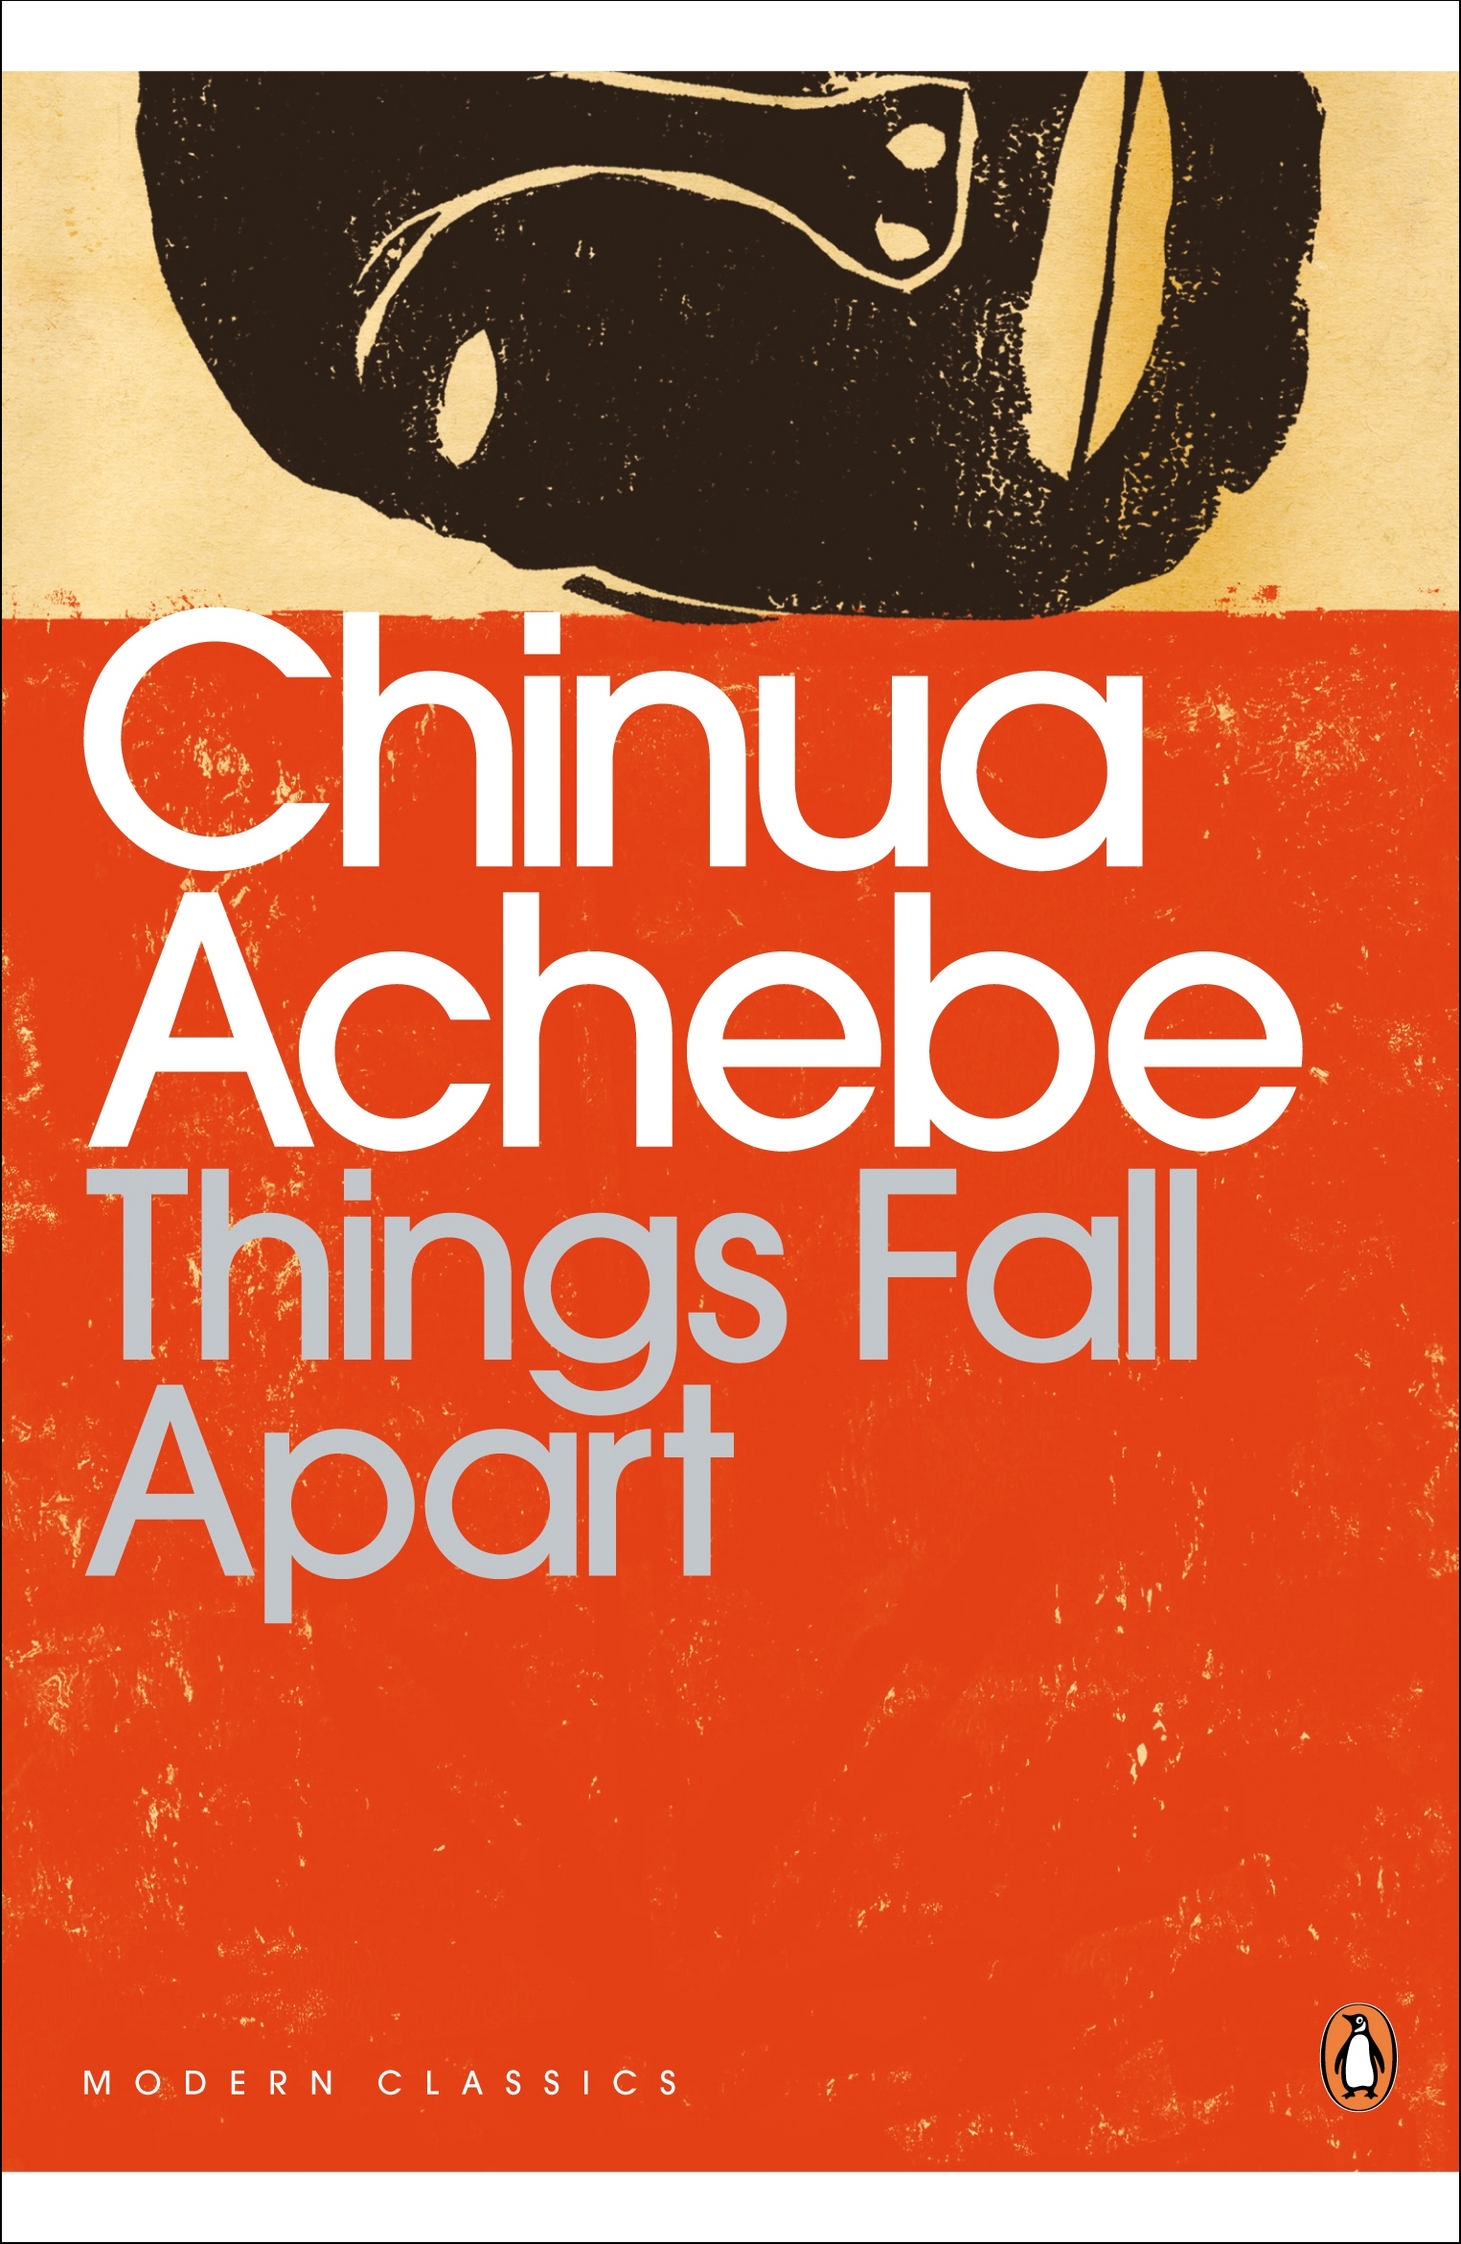 Okonkwo, the protagonist in 'Things Fall Apart', is a member of what clan?